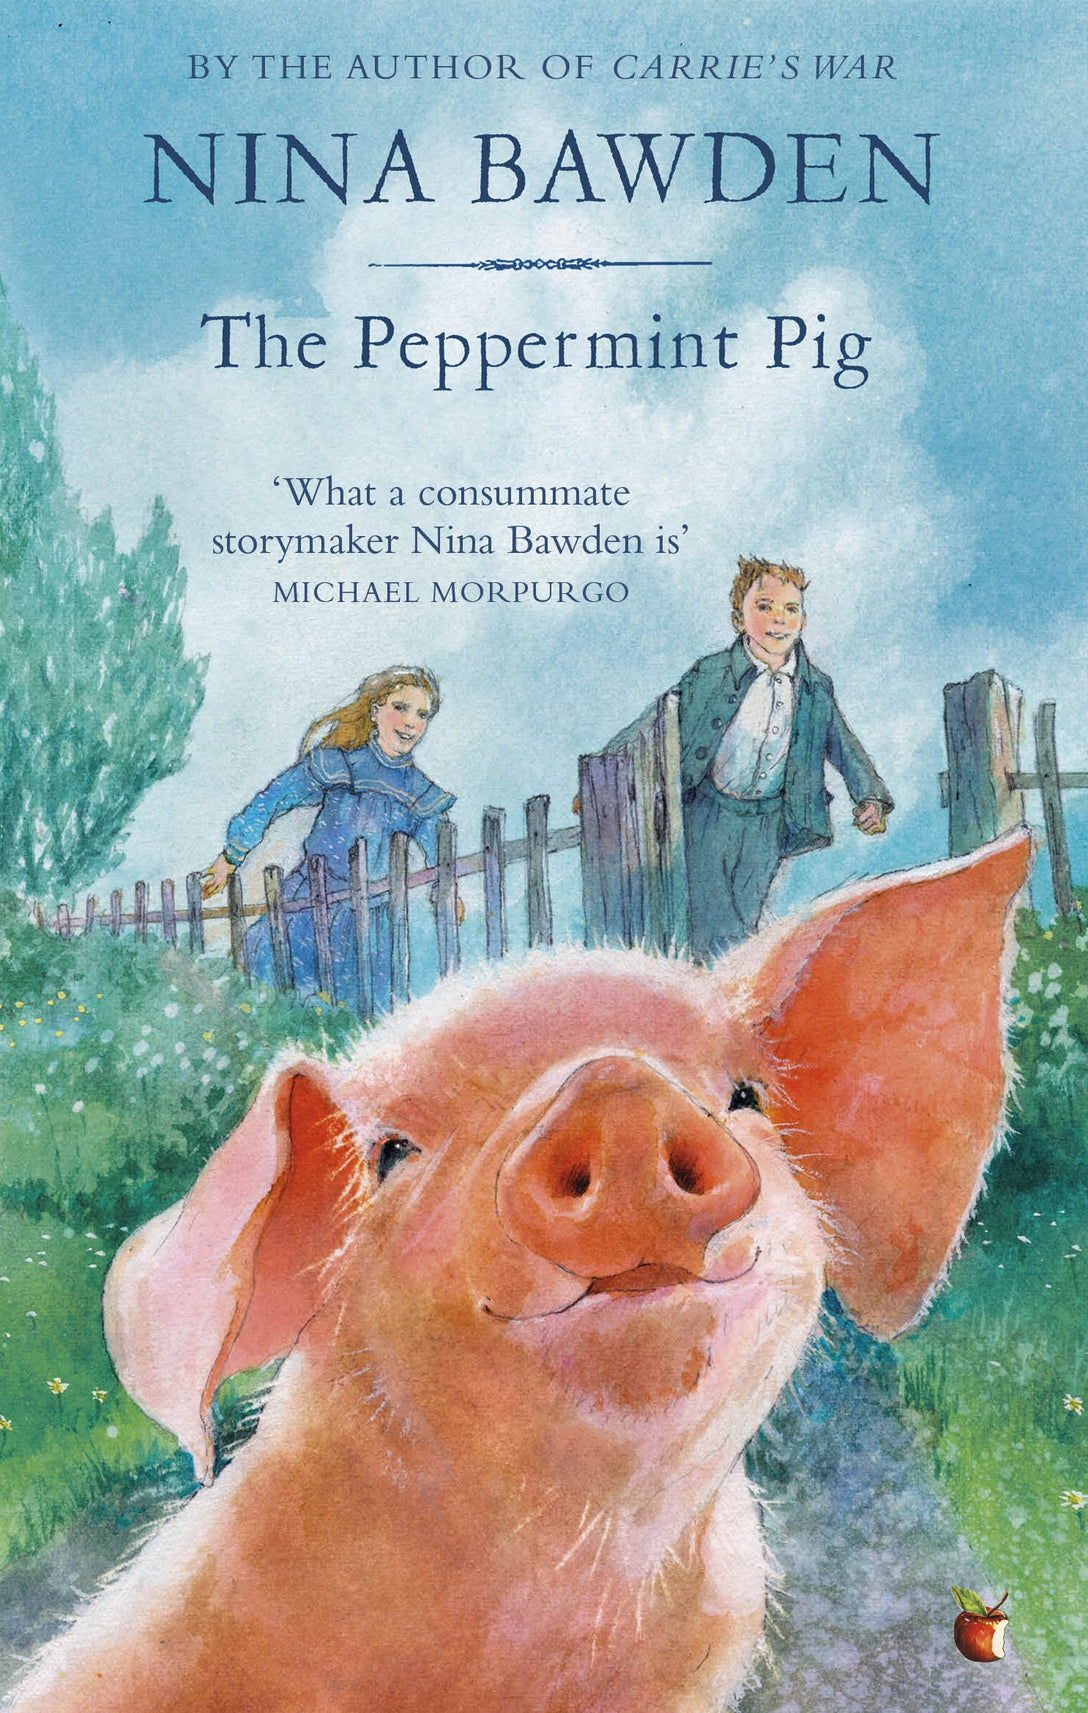 The Peppermint Pig by Nina Bawden, Alan Marks